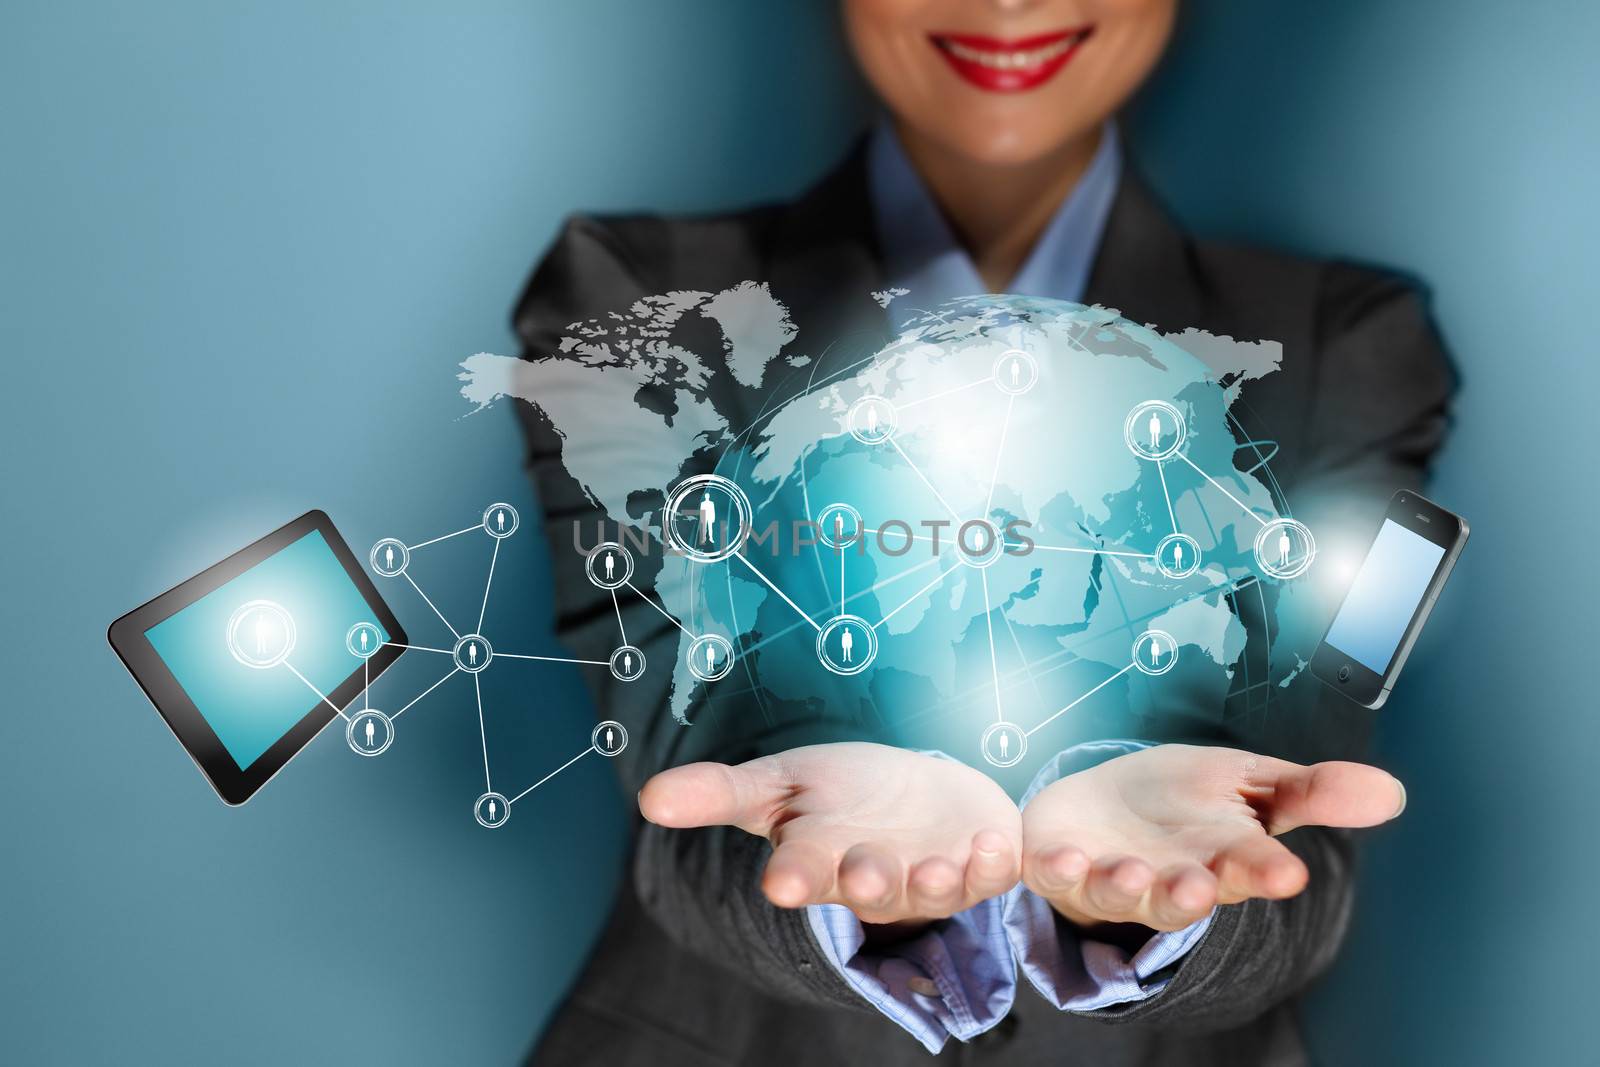 Close up image of businesswoman with 3d images of devices in her hands